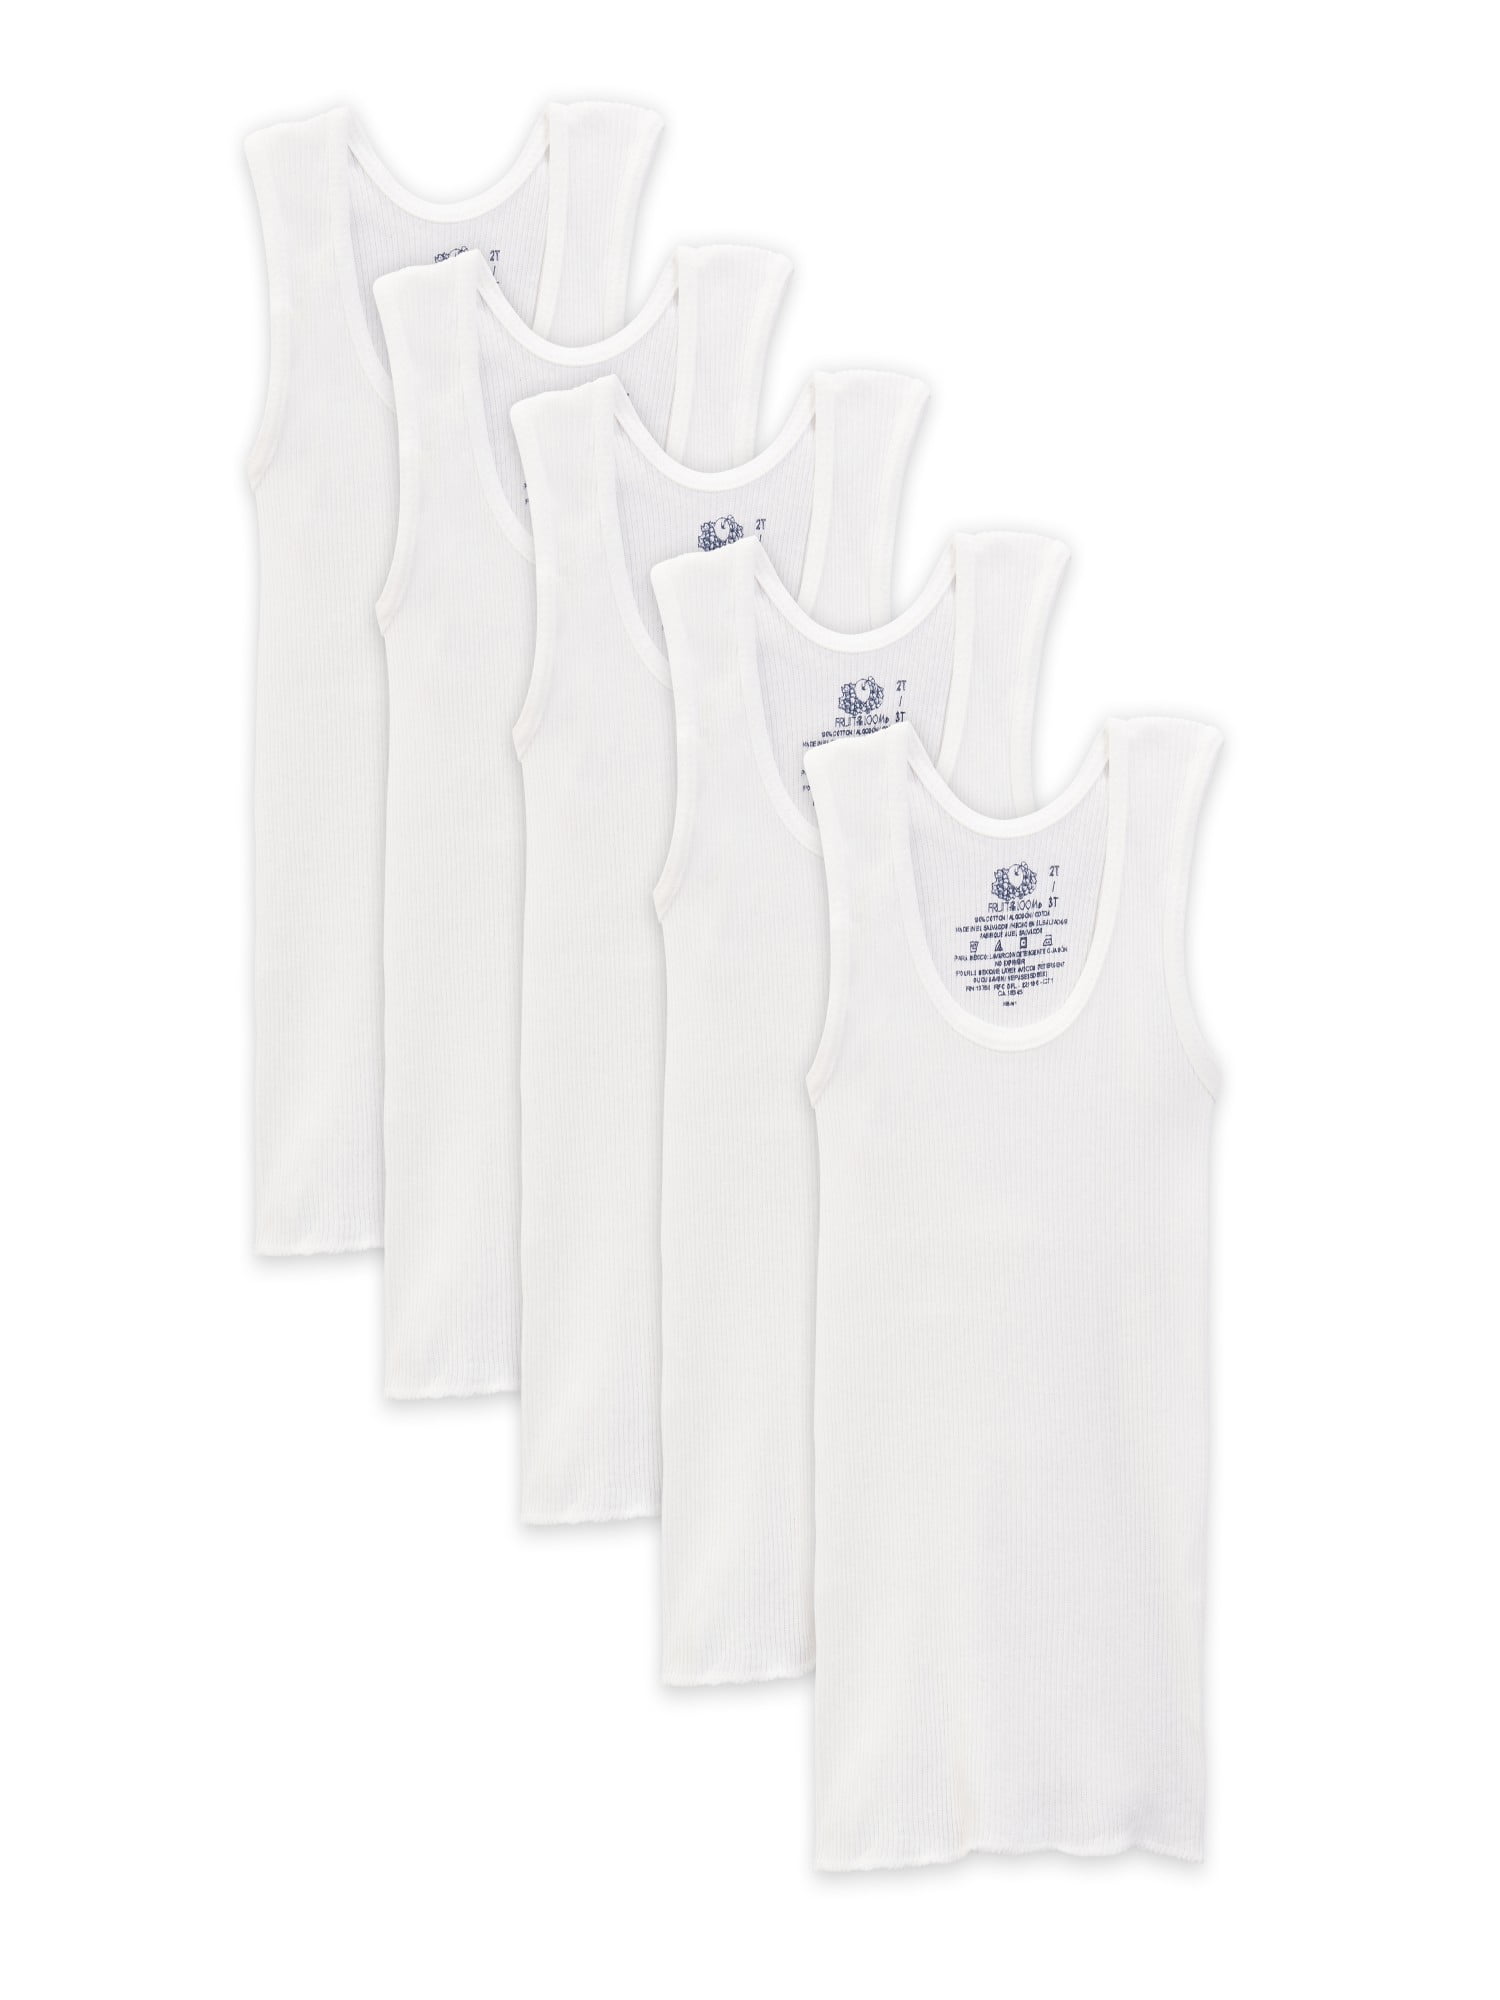 Fruit of the Loom Toddler Boy Tank Undershirts, 5 Pack, Sizes 2T-5T ...